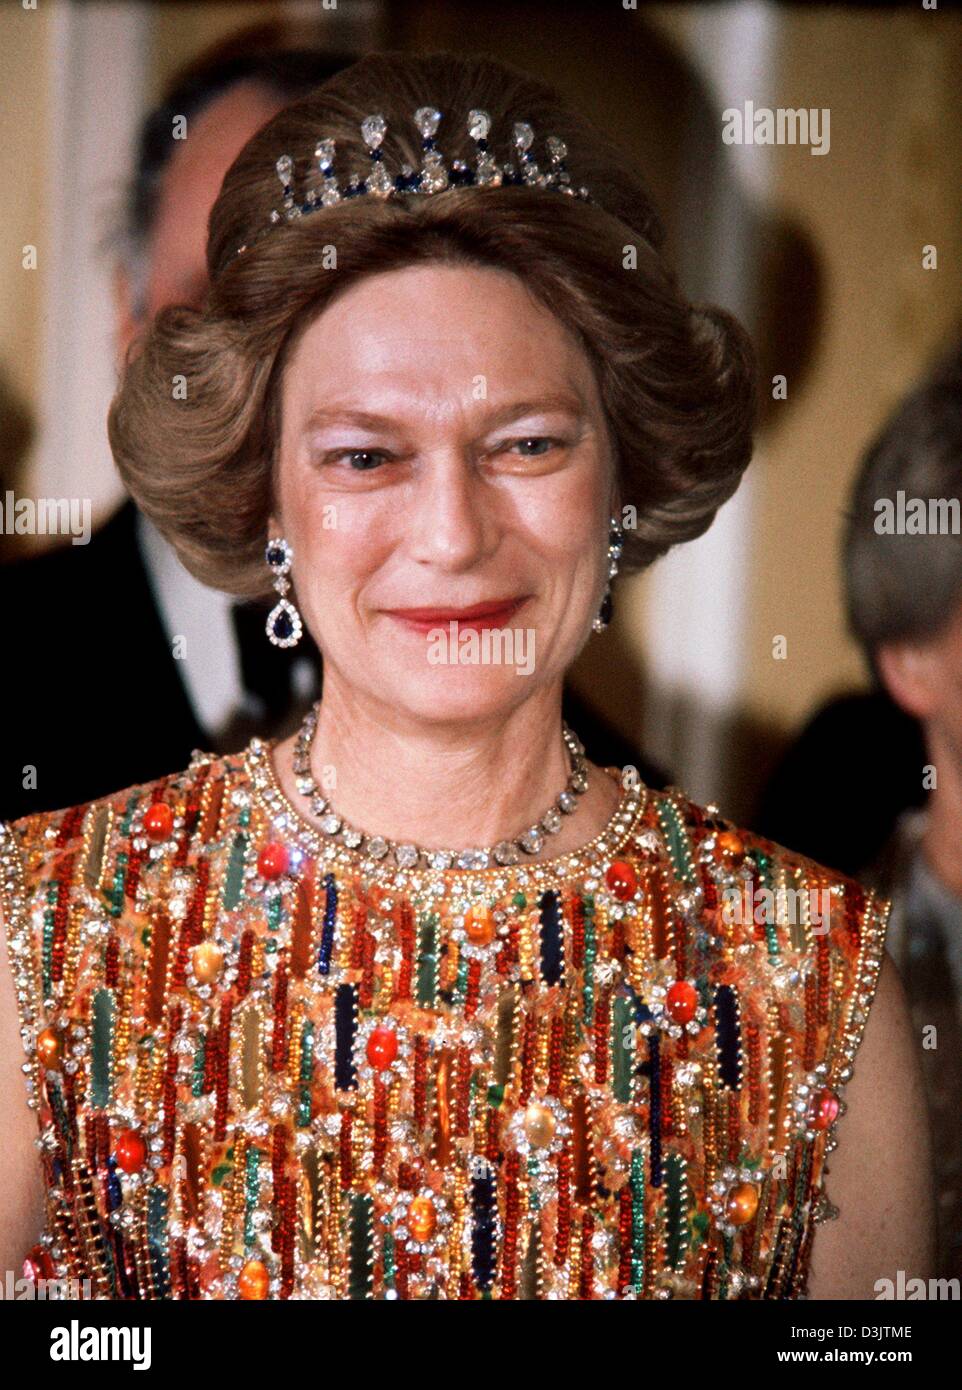 (dpa files) - Grand duchess Josephine Charlotte smiles during an official visit to Germany in Bonn, Germany, 1 March 1977. The Luxembourg court announced that the mother of head of state Grand duke Henri died on Monday morning (10 January 2005) at the age of 77 at the Fischbach castle. She had been suffering for the last two years from a lung tumour. Josephine Charlotte was born on Stock Photo